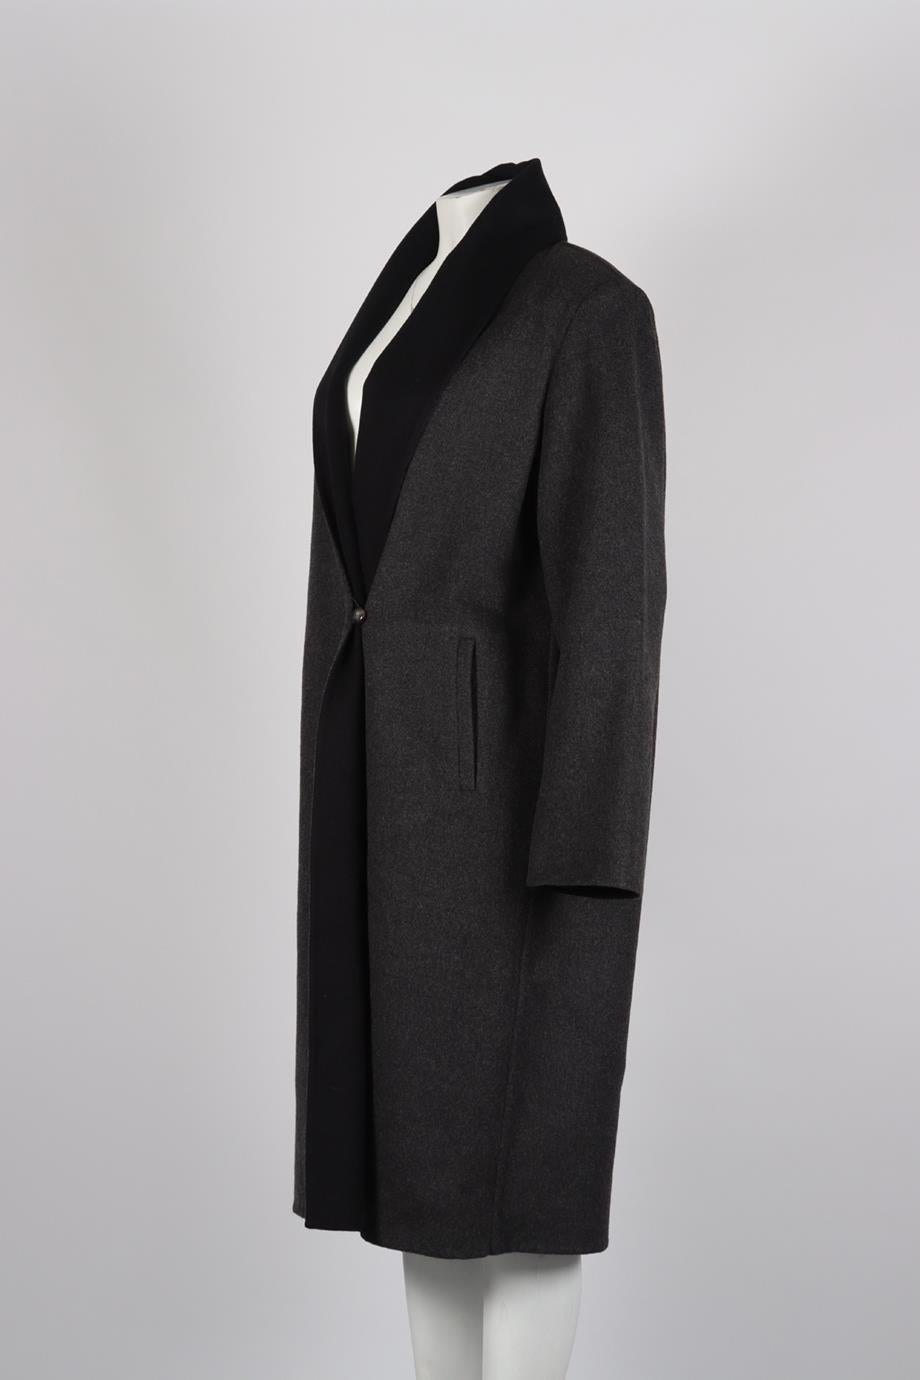 Marina Rinaldi Wool And Angora Blend Coat Uk 18 In Excellent Condition In London, GB